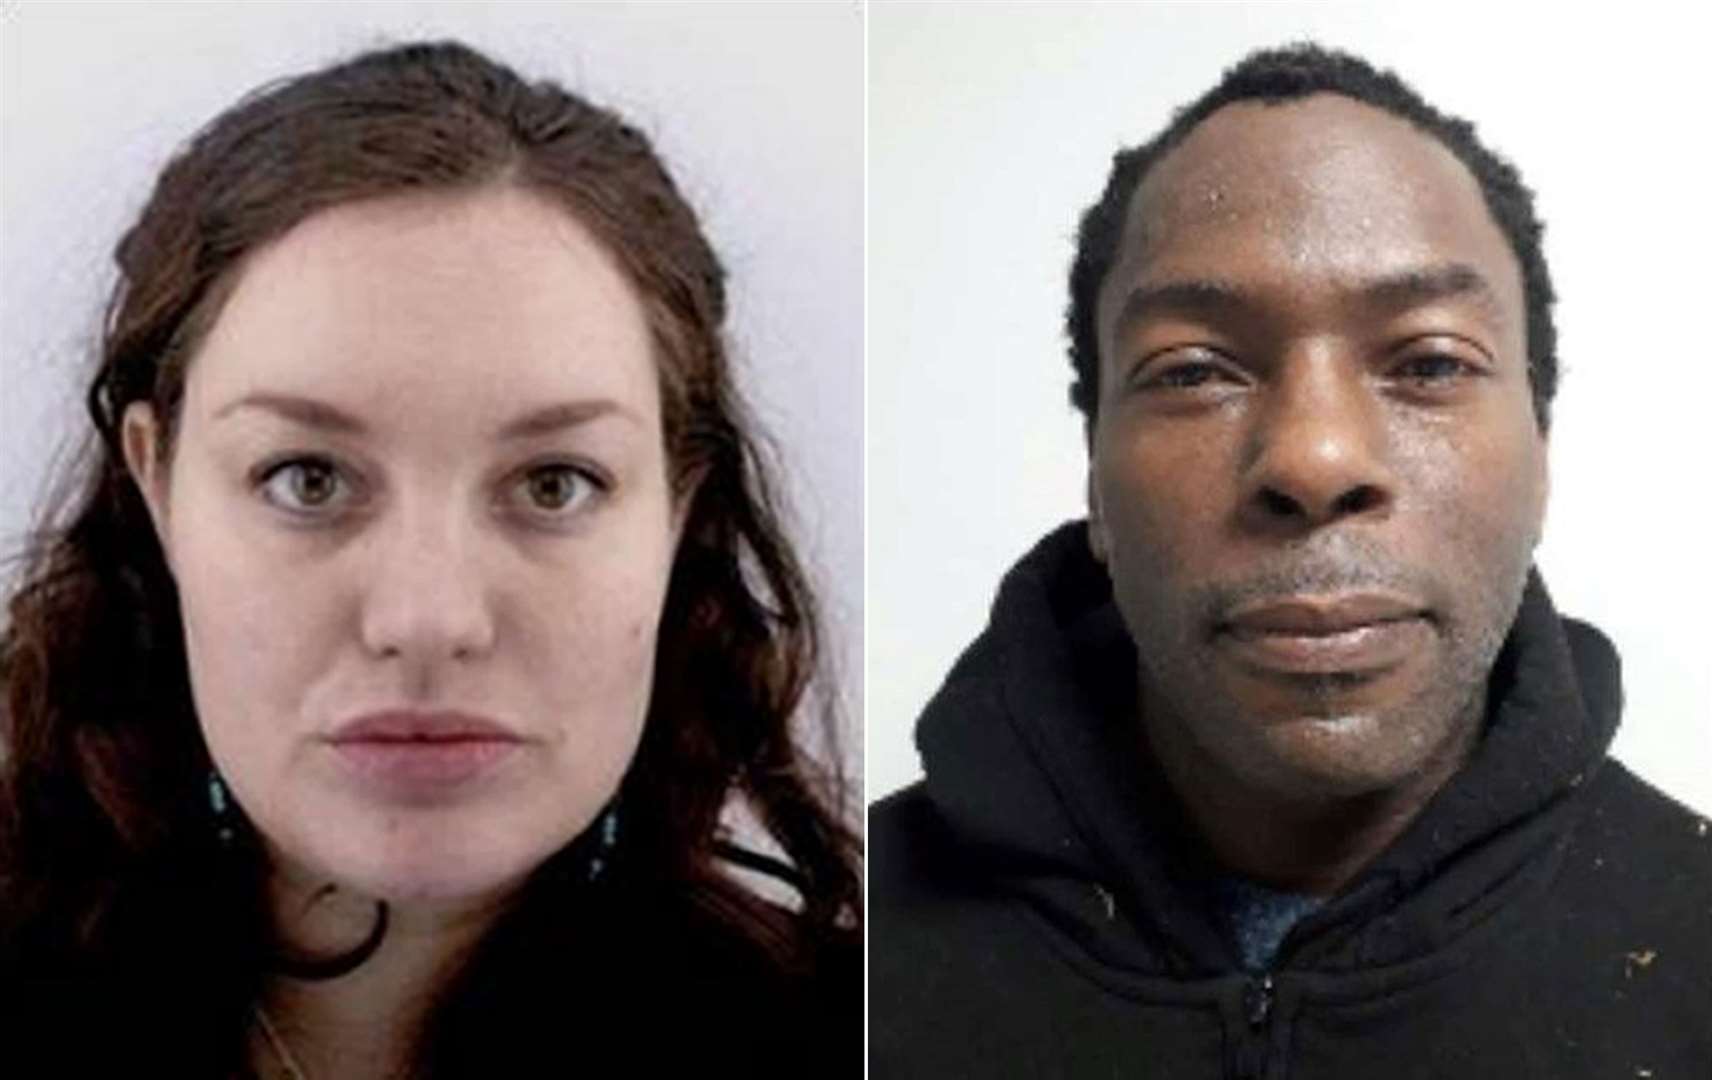 Constance Marten and Mark Gordon deny manslaughter by gross negligence of the girl between January 4 and February 27 last year (GMP/PA)